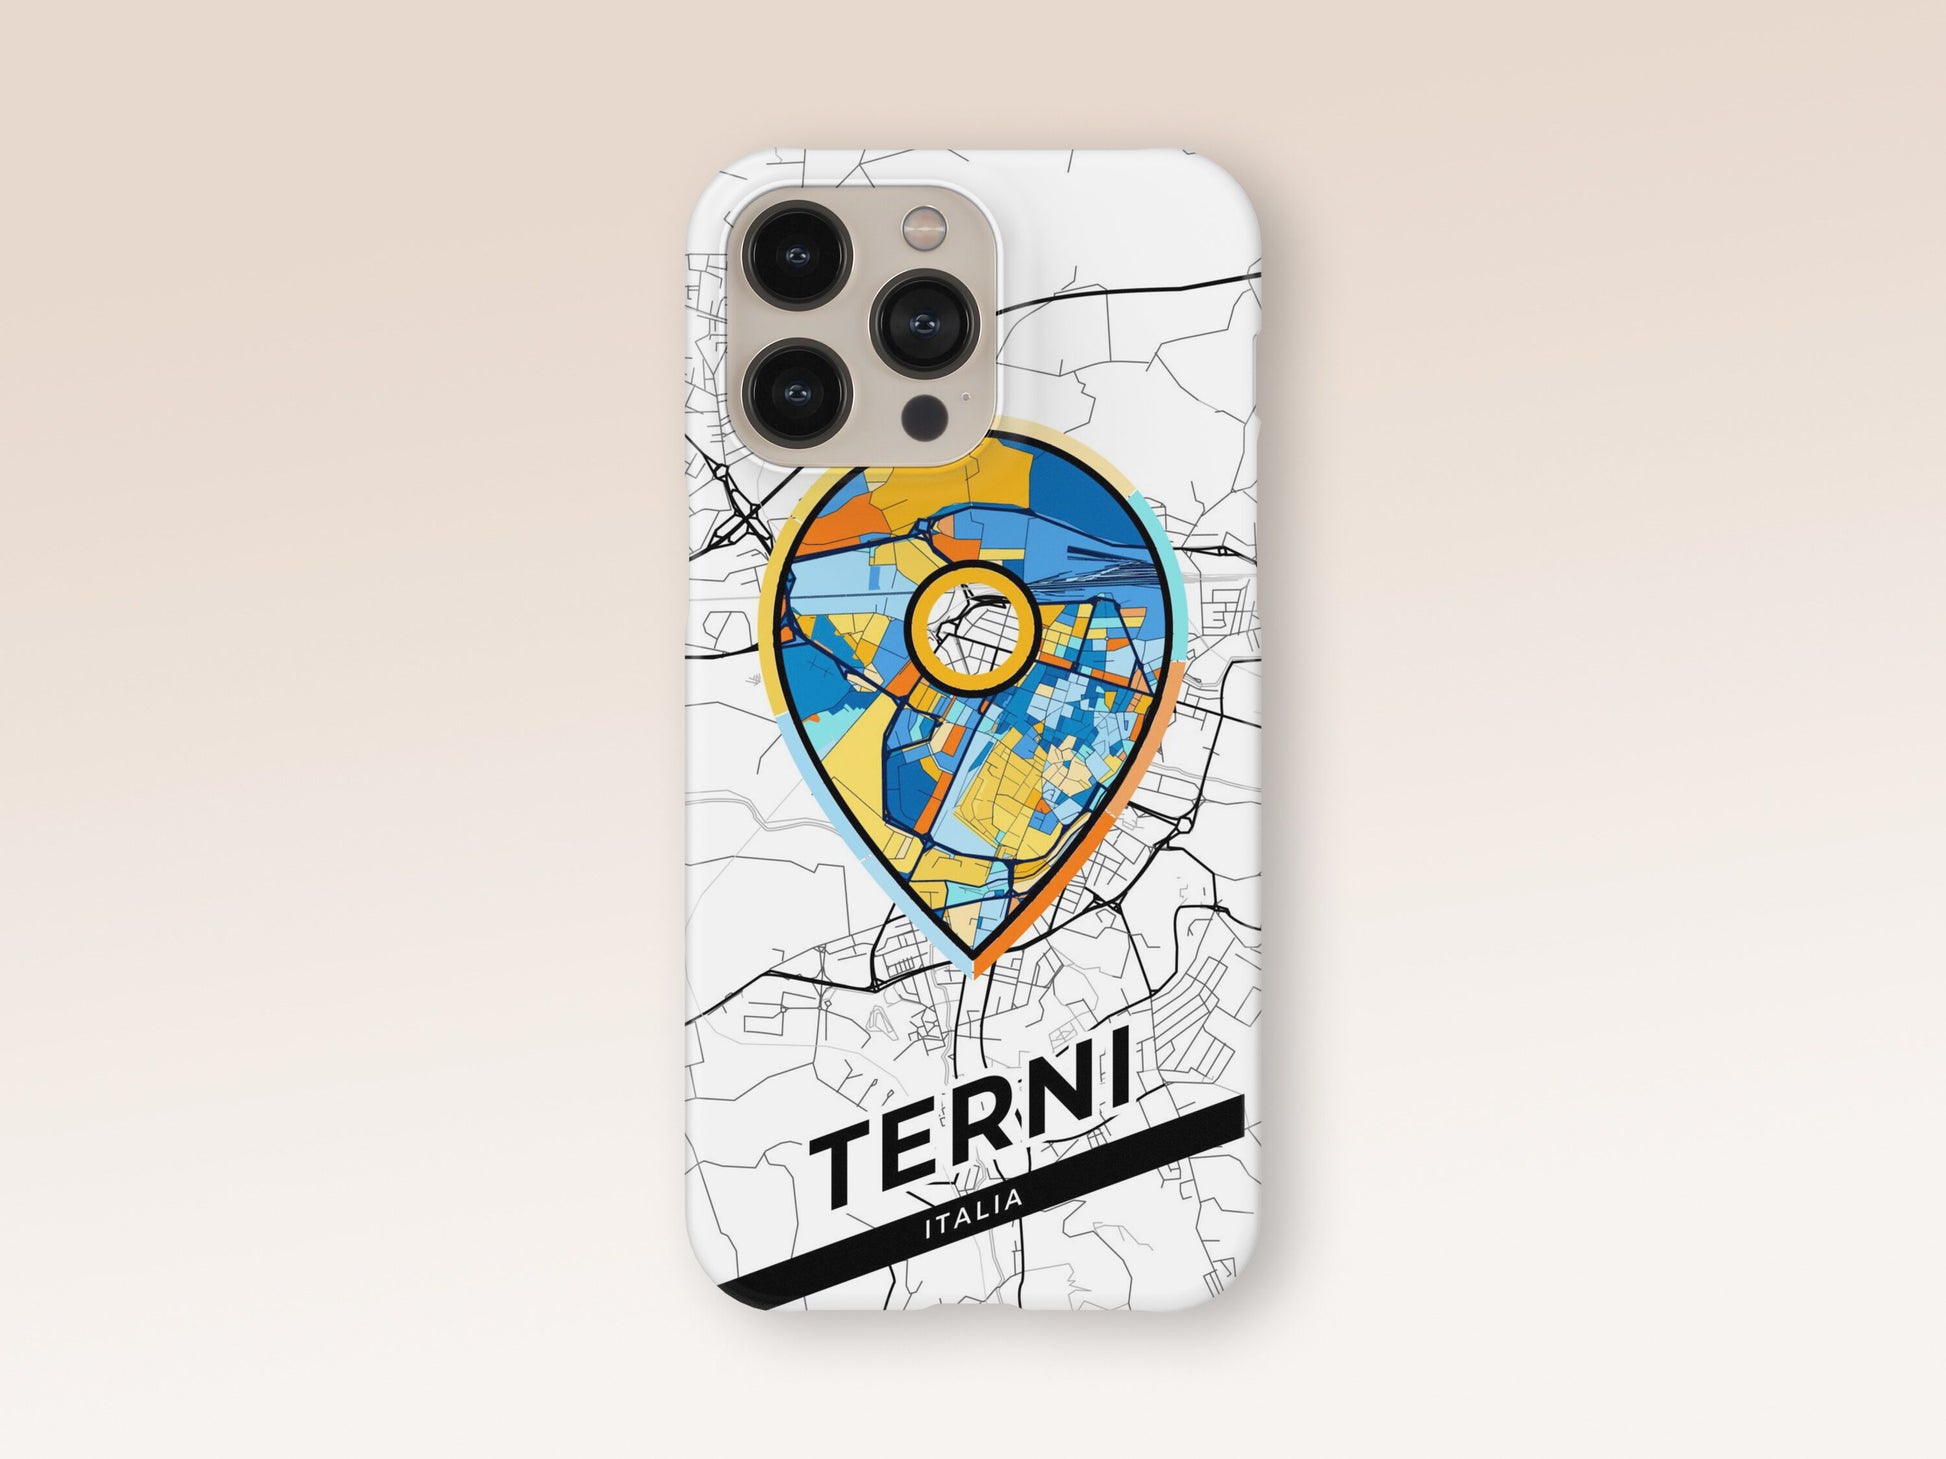 Terni Italy slim phone case with colorful icon 1